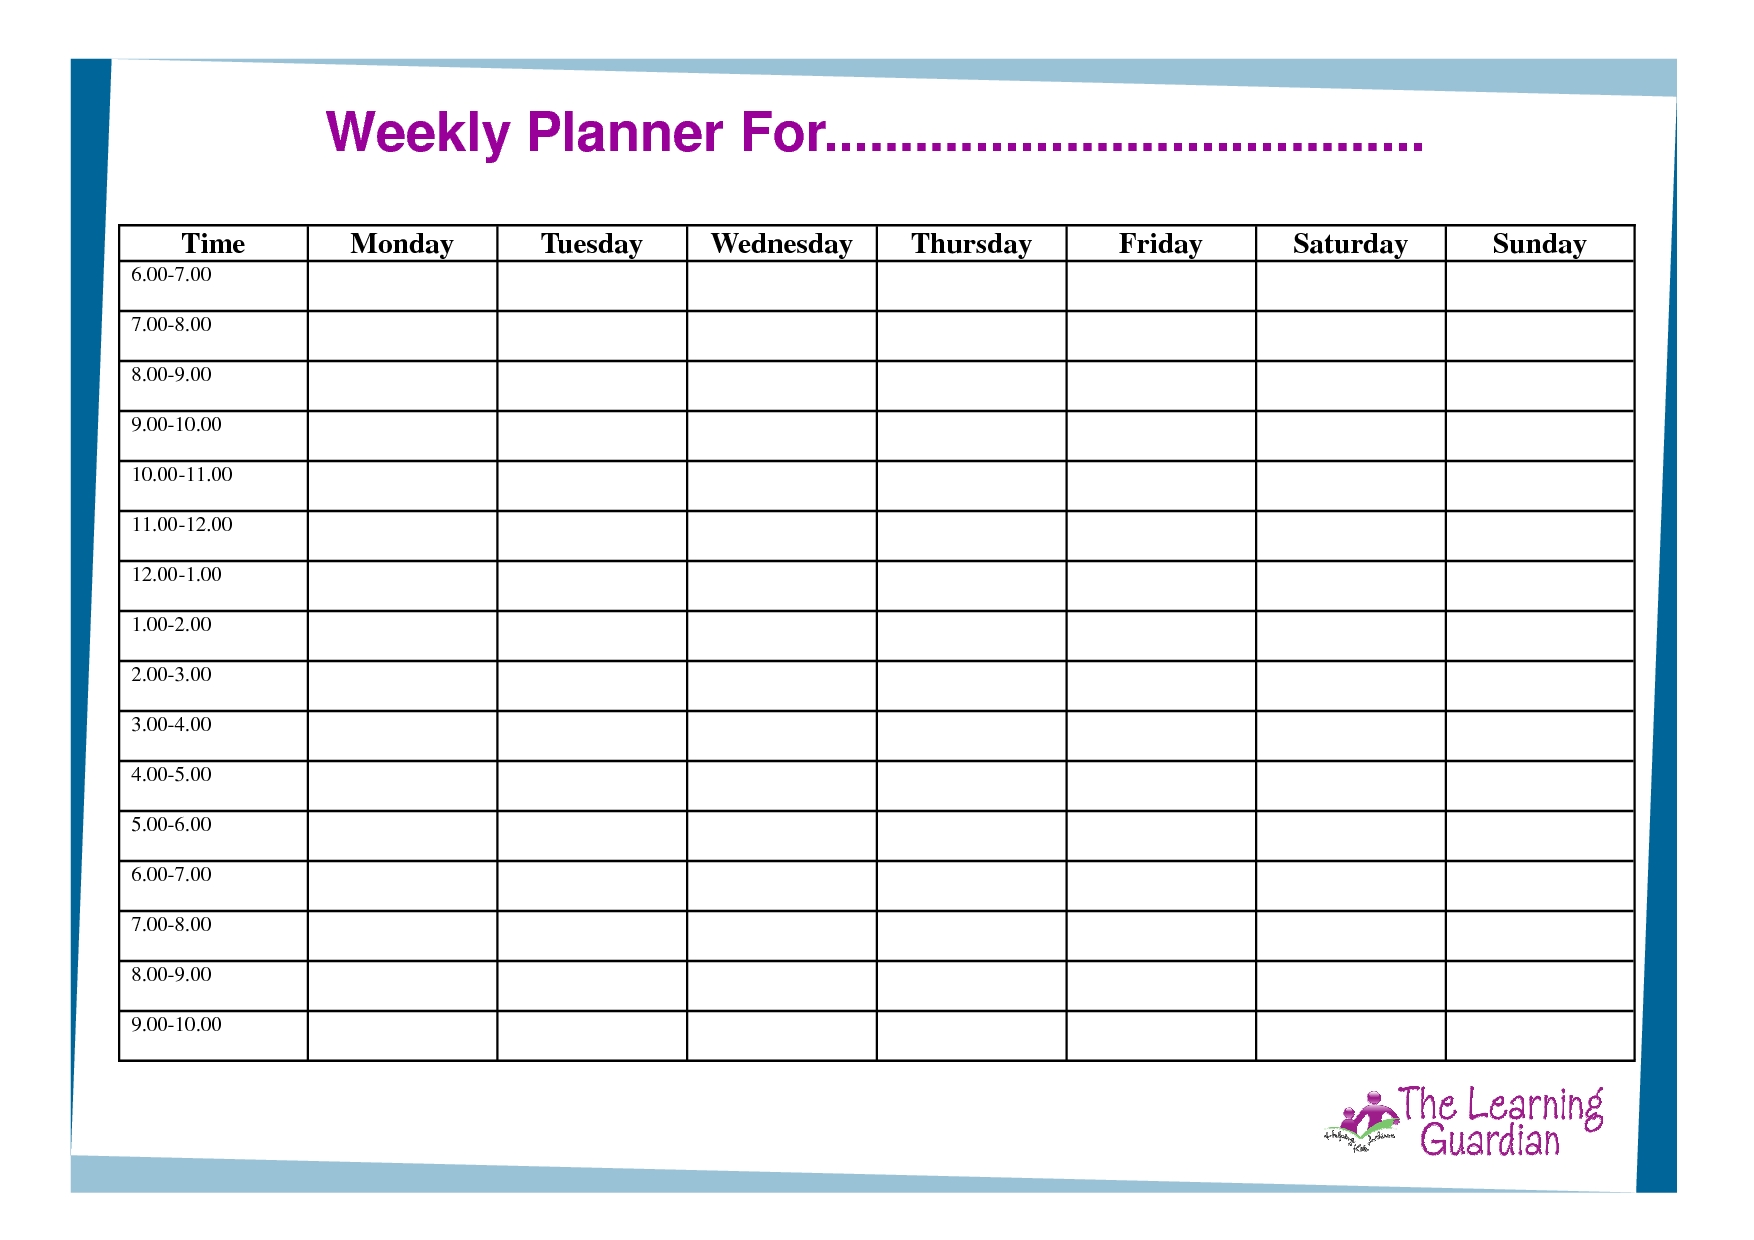 Free Printable Weekly Calendar Templates | Weekly Planner Monday To Friday Calendar Template